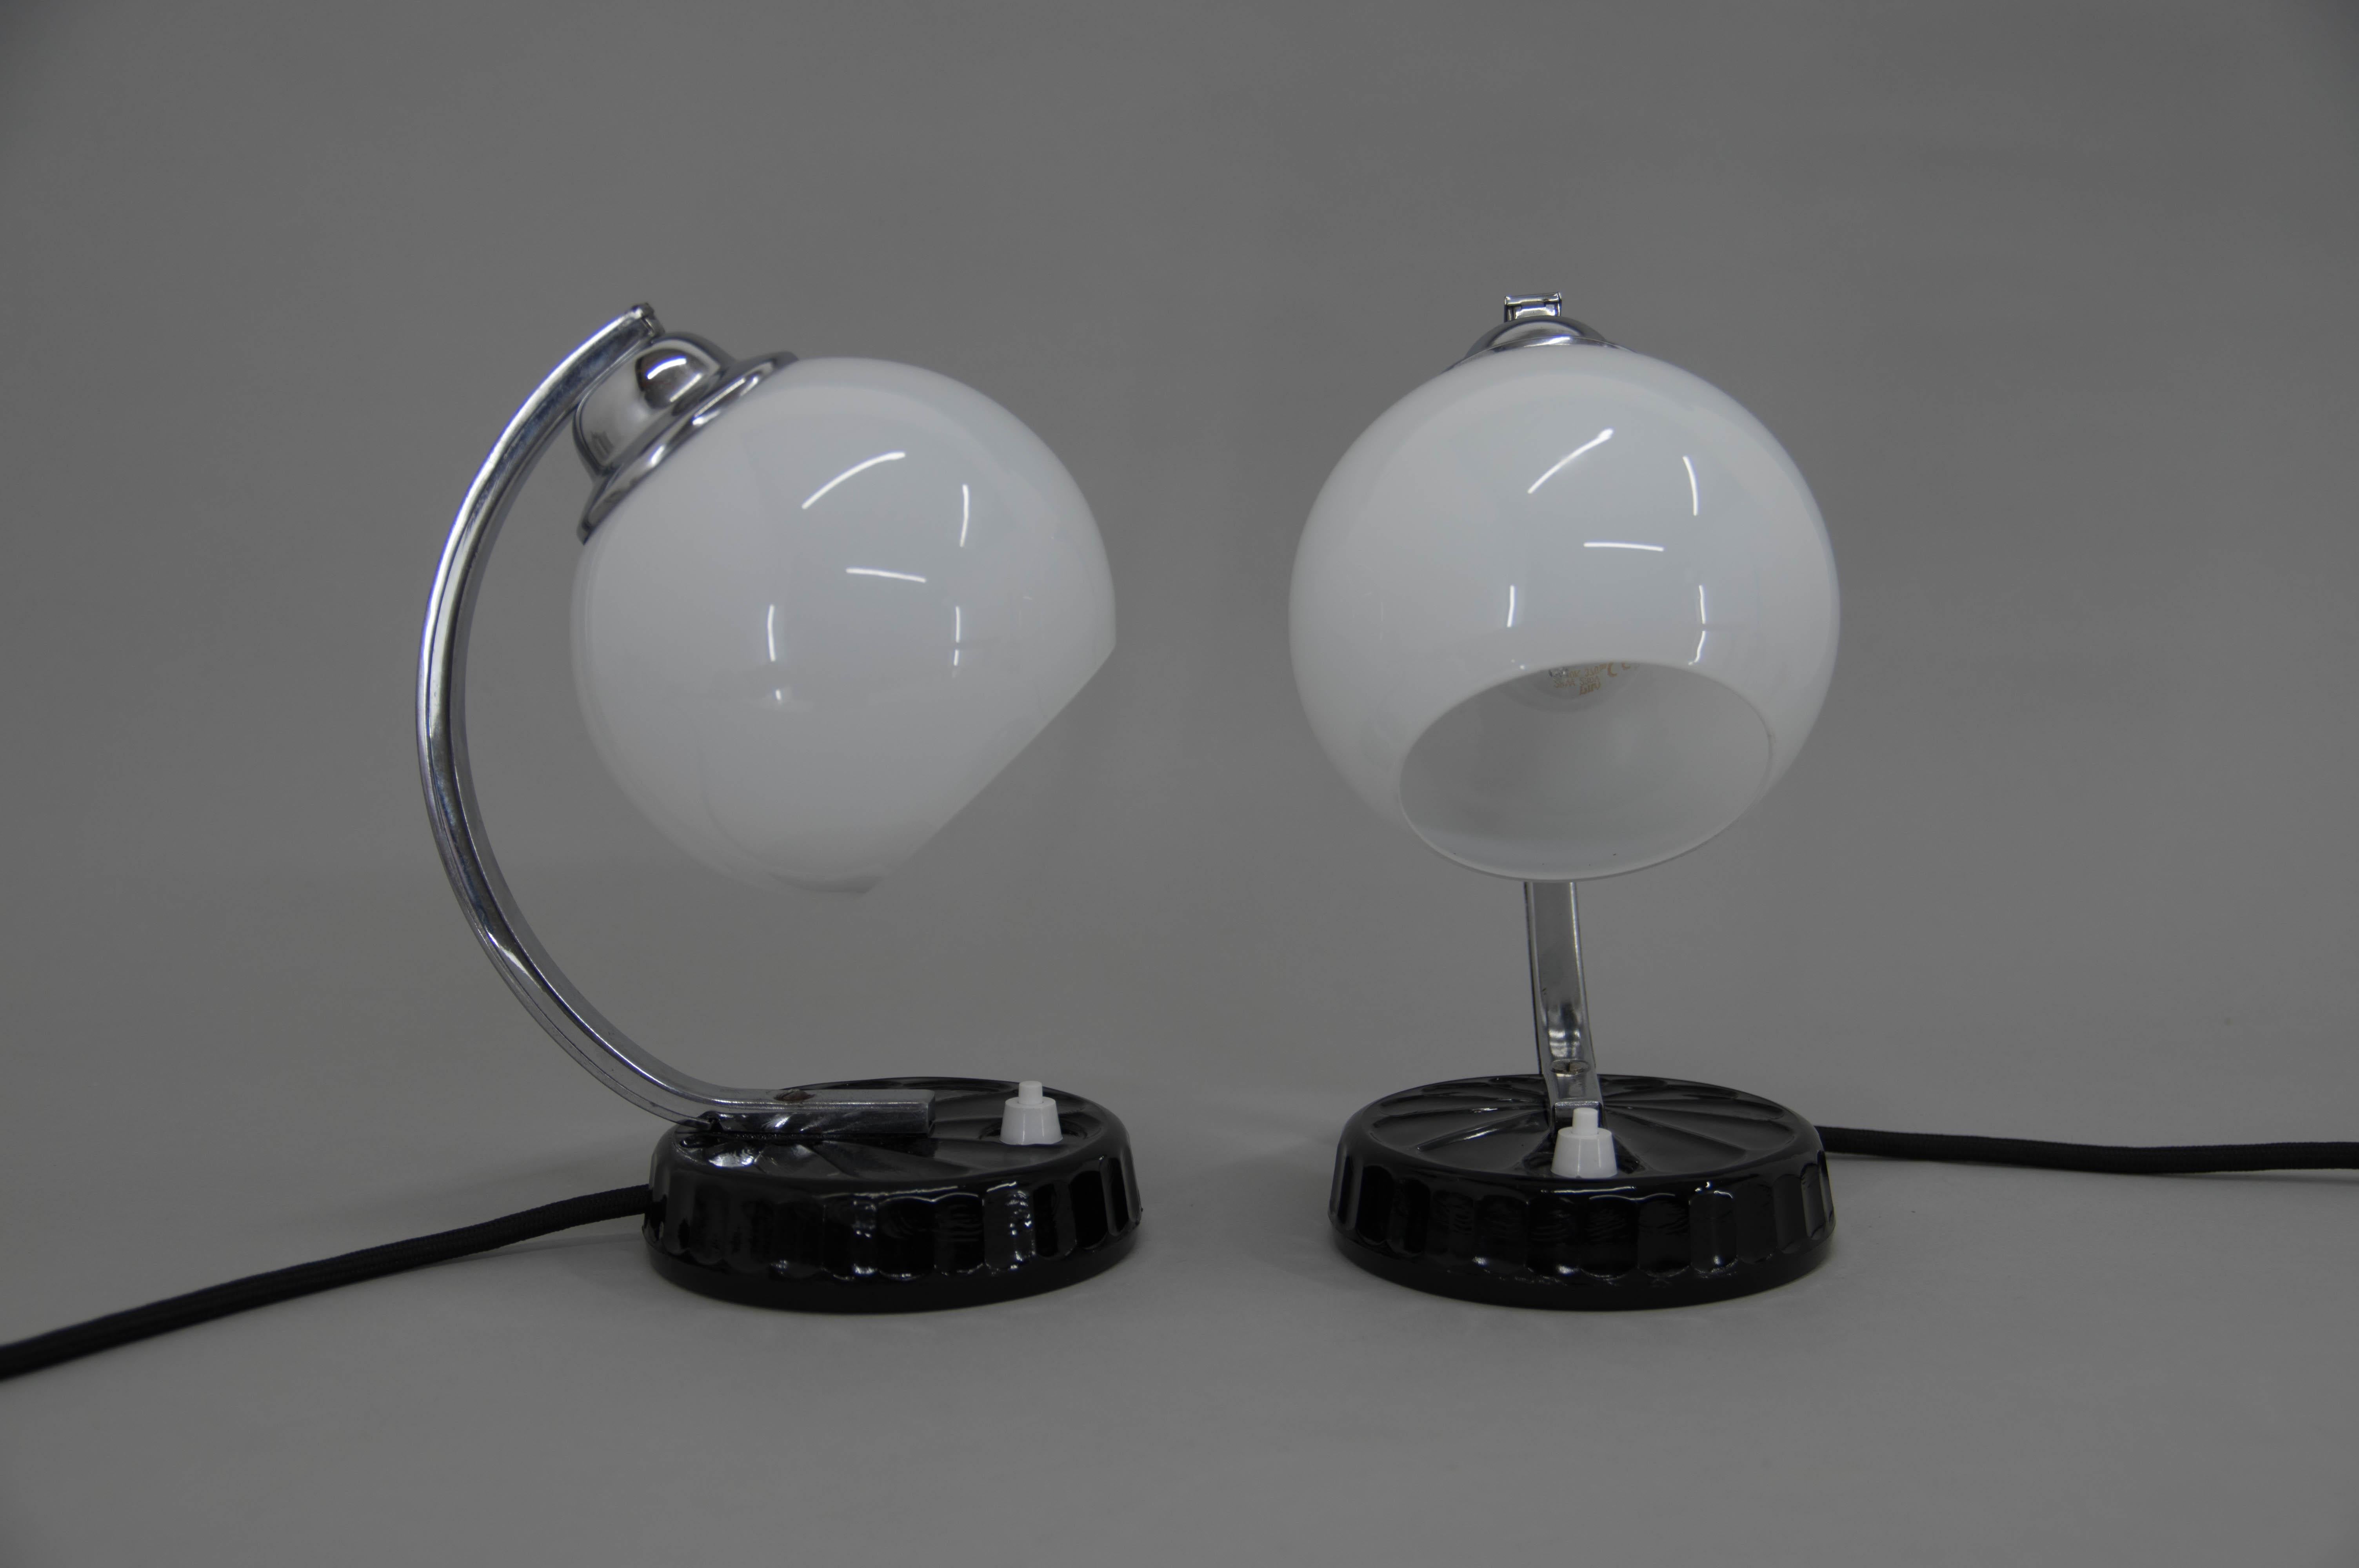 Black glass base, chrome arms and opaline glass shade.
Very good condition, glass in perfect condition.
Rewired: 1x40W, E25-E27 bulb
US plug adapters included.